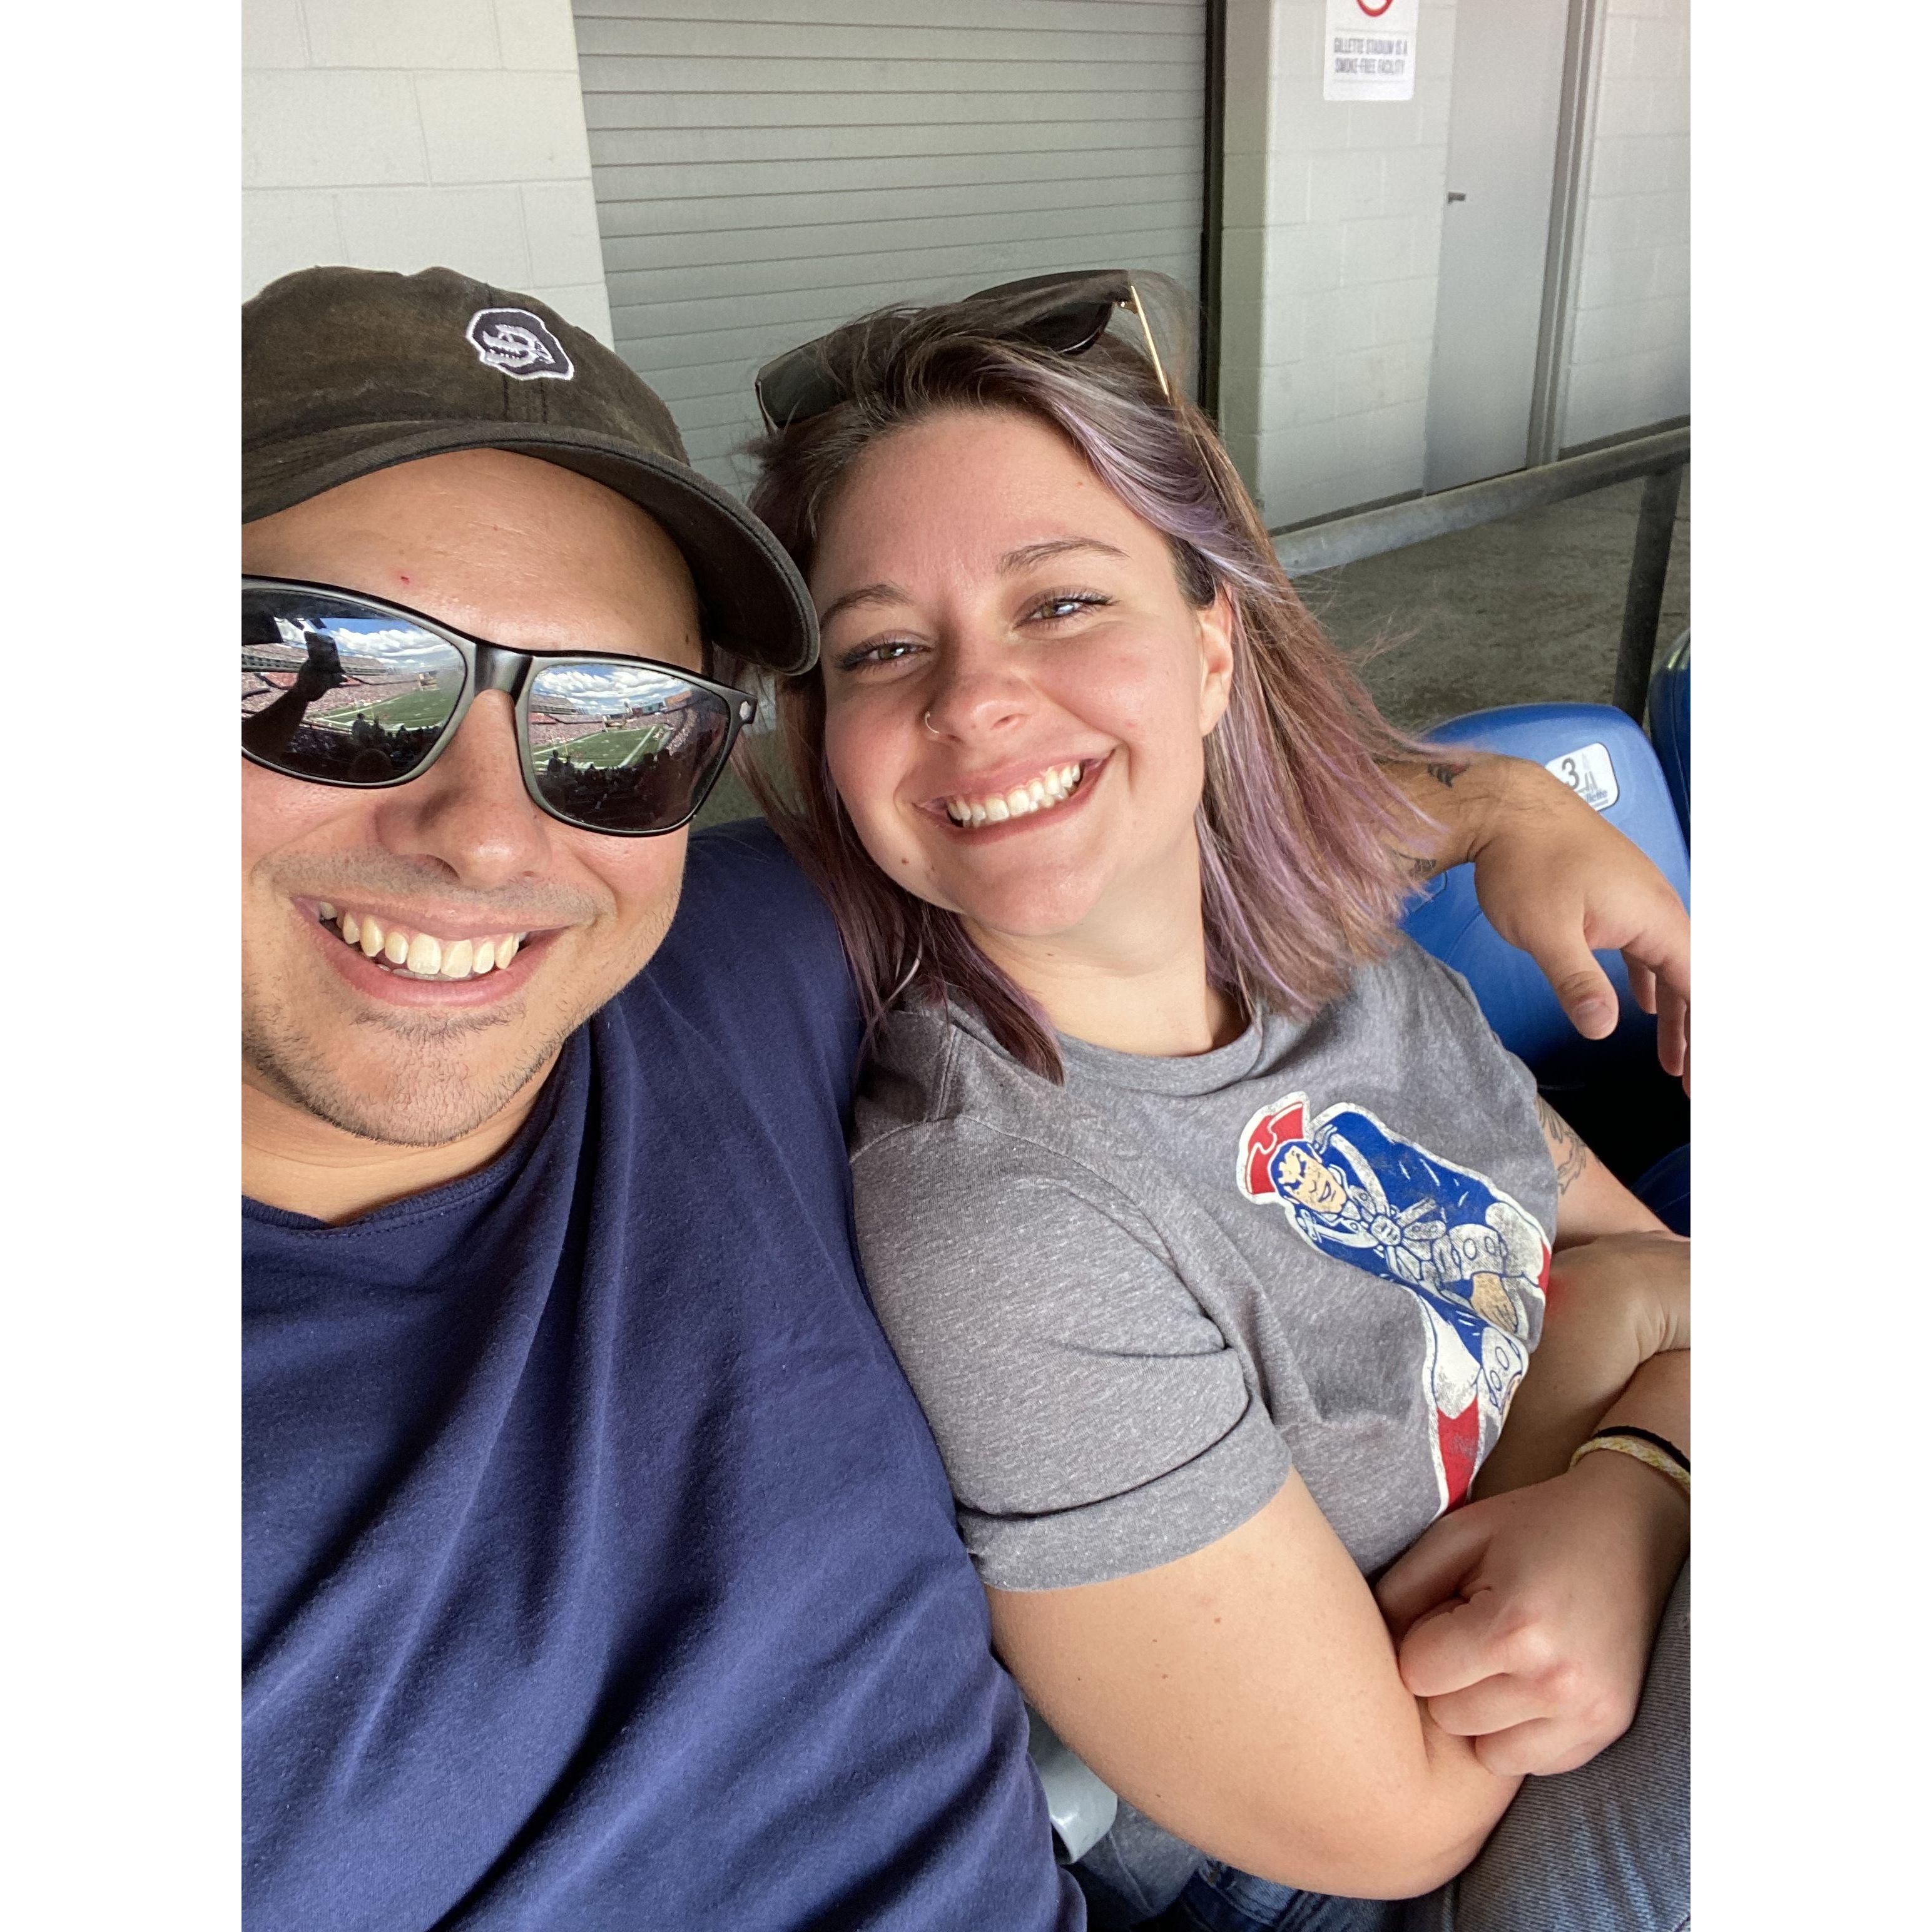 Date to Gillette Stadium our first month dating in September 2021